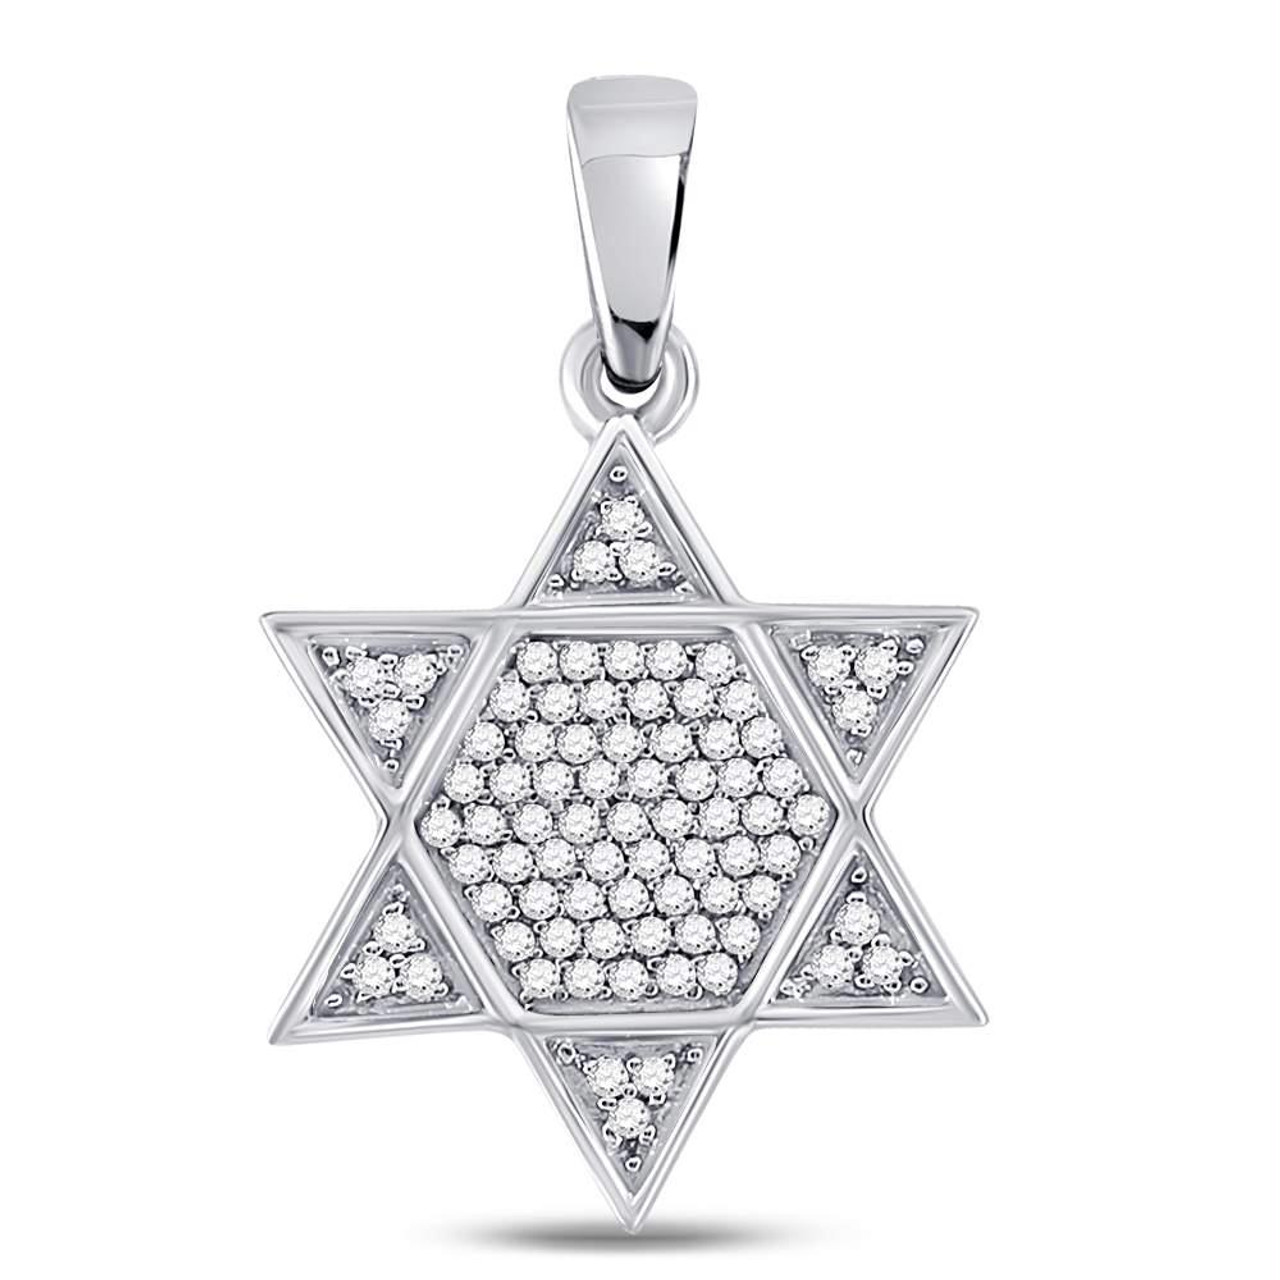 Buy U7 Jewish Jewelry Megan Star of David Pendant Necklace Blue Charm Women  Men Chain Stainless Steel Israel Necklace at Amazon.in